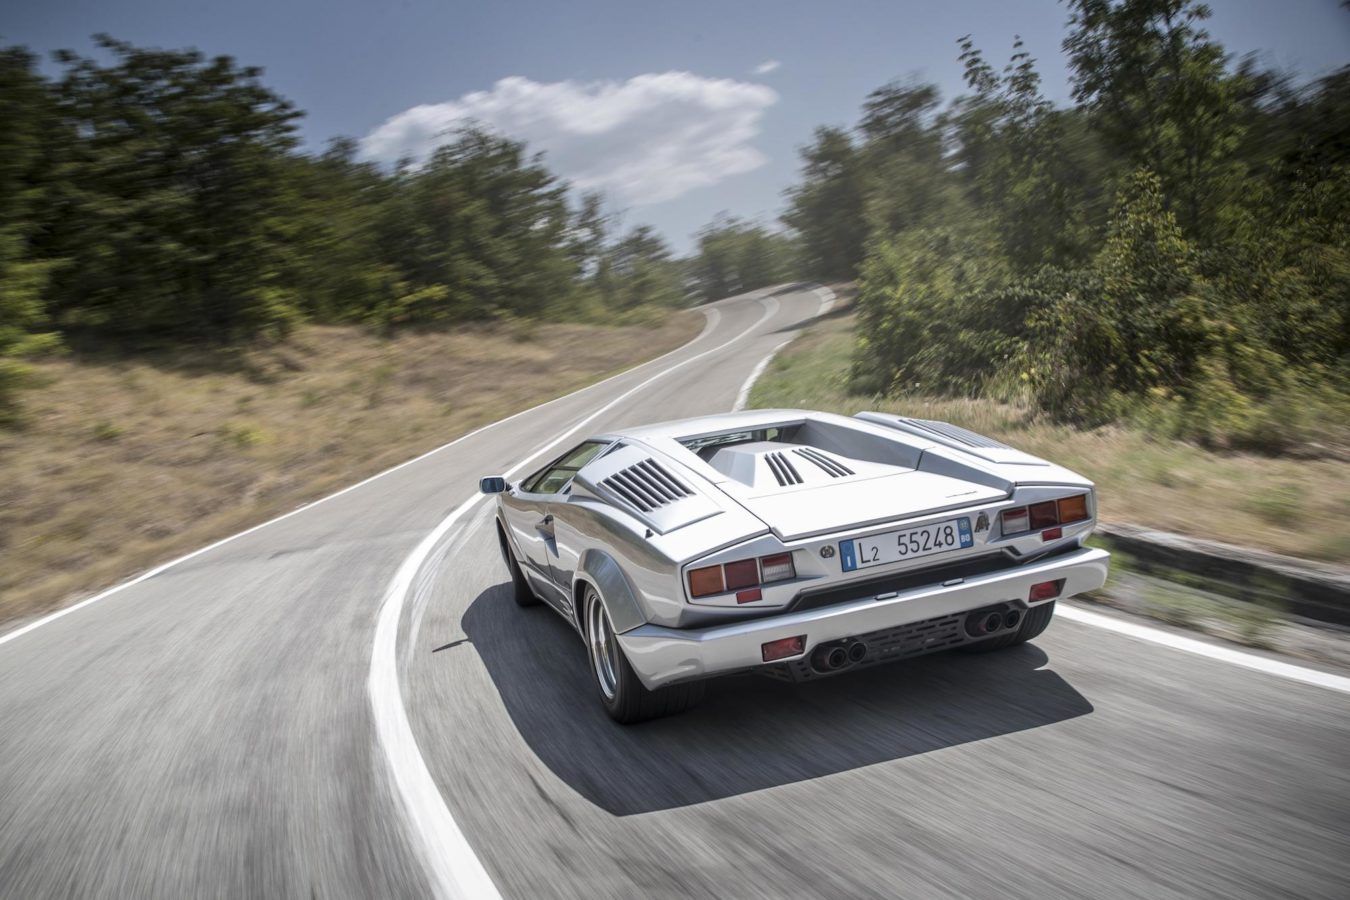 This is why the Lamborghini Countach is one of the most important cars ever made